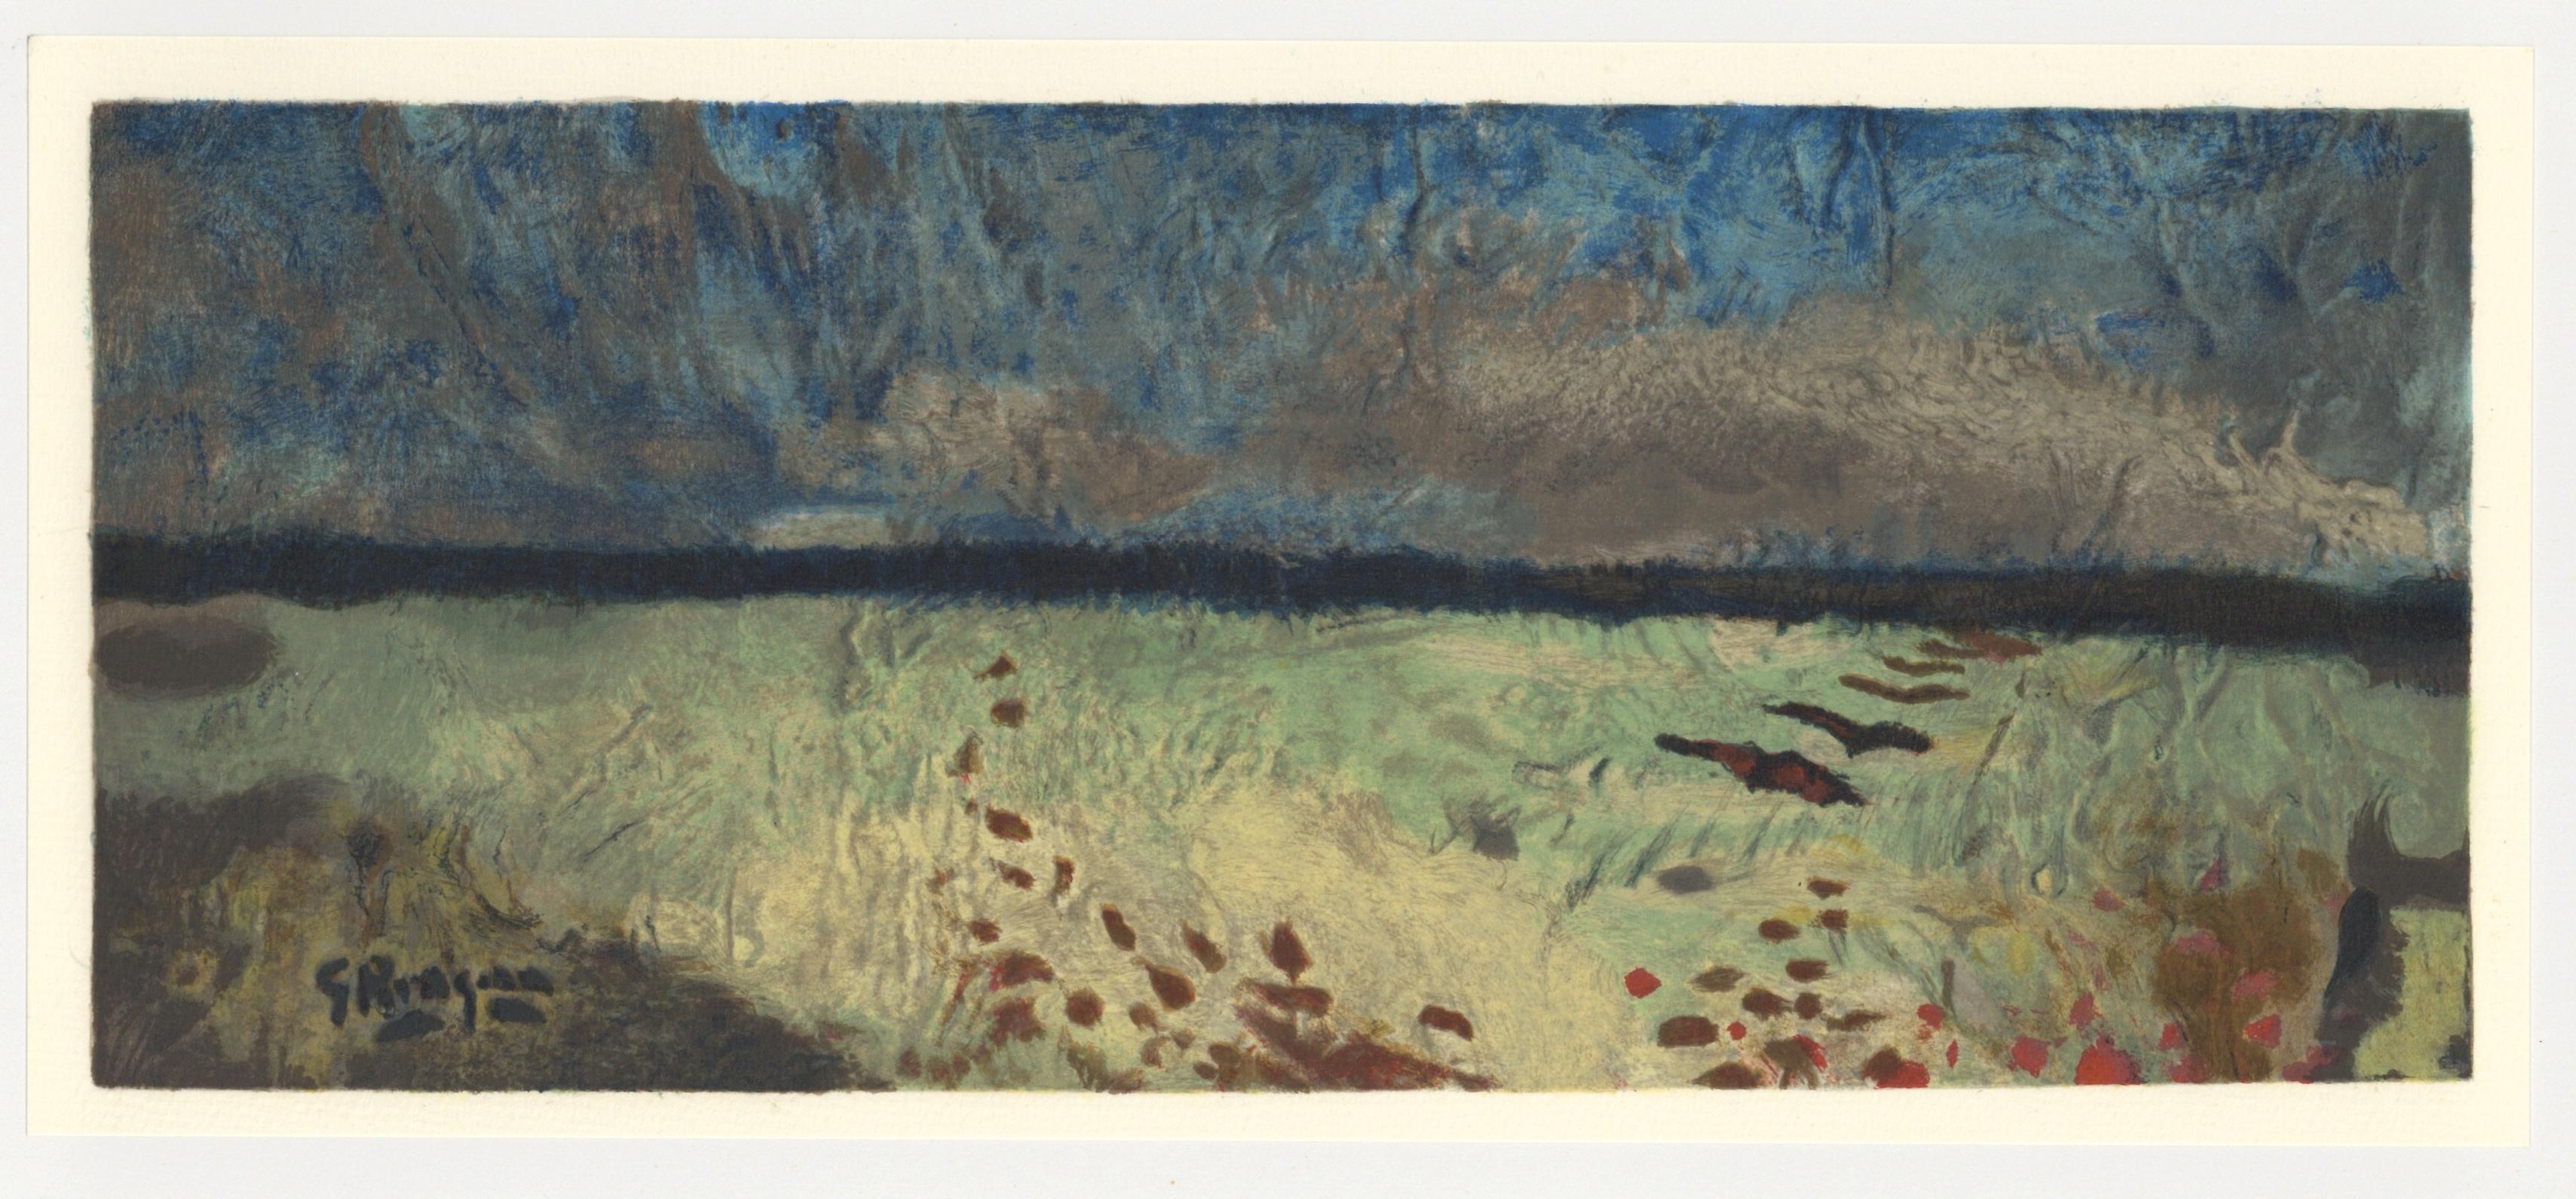 "Paysage aux coquelicots" lithograph - Print by (after) Georges Braque